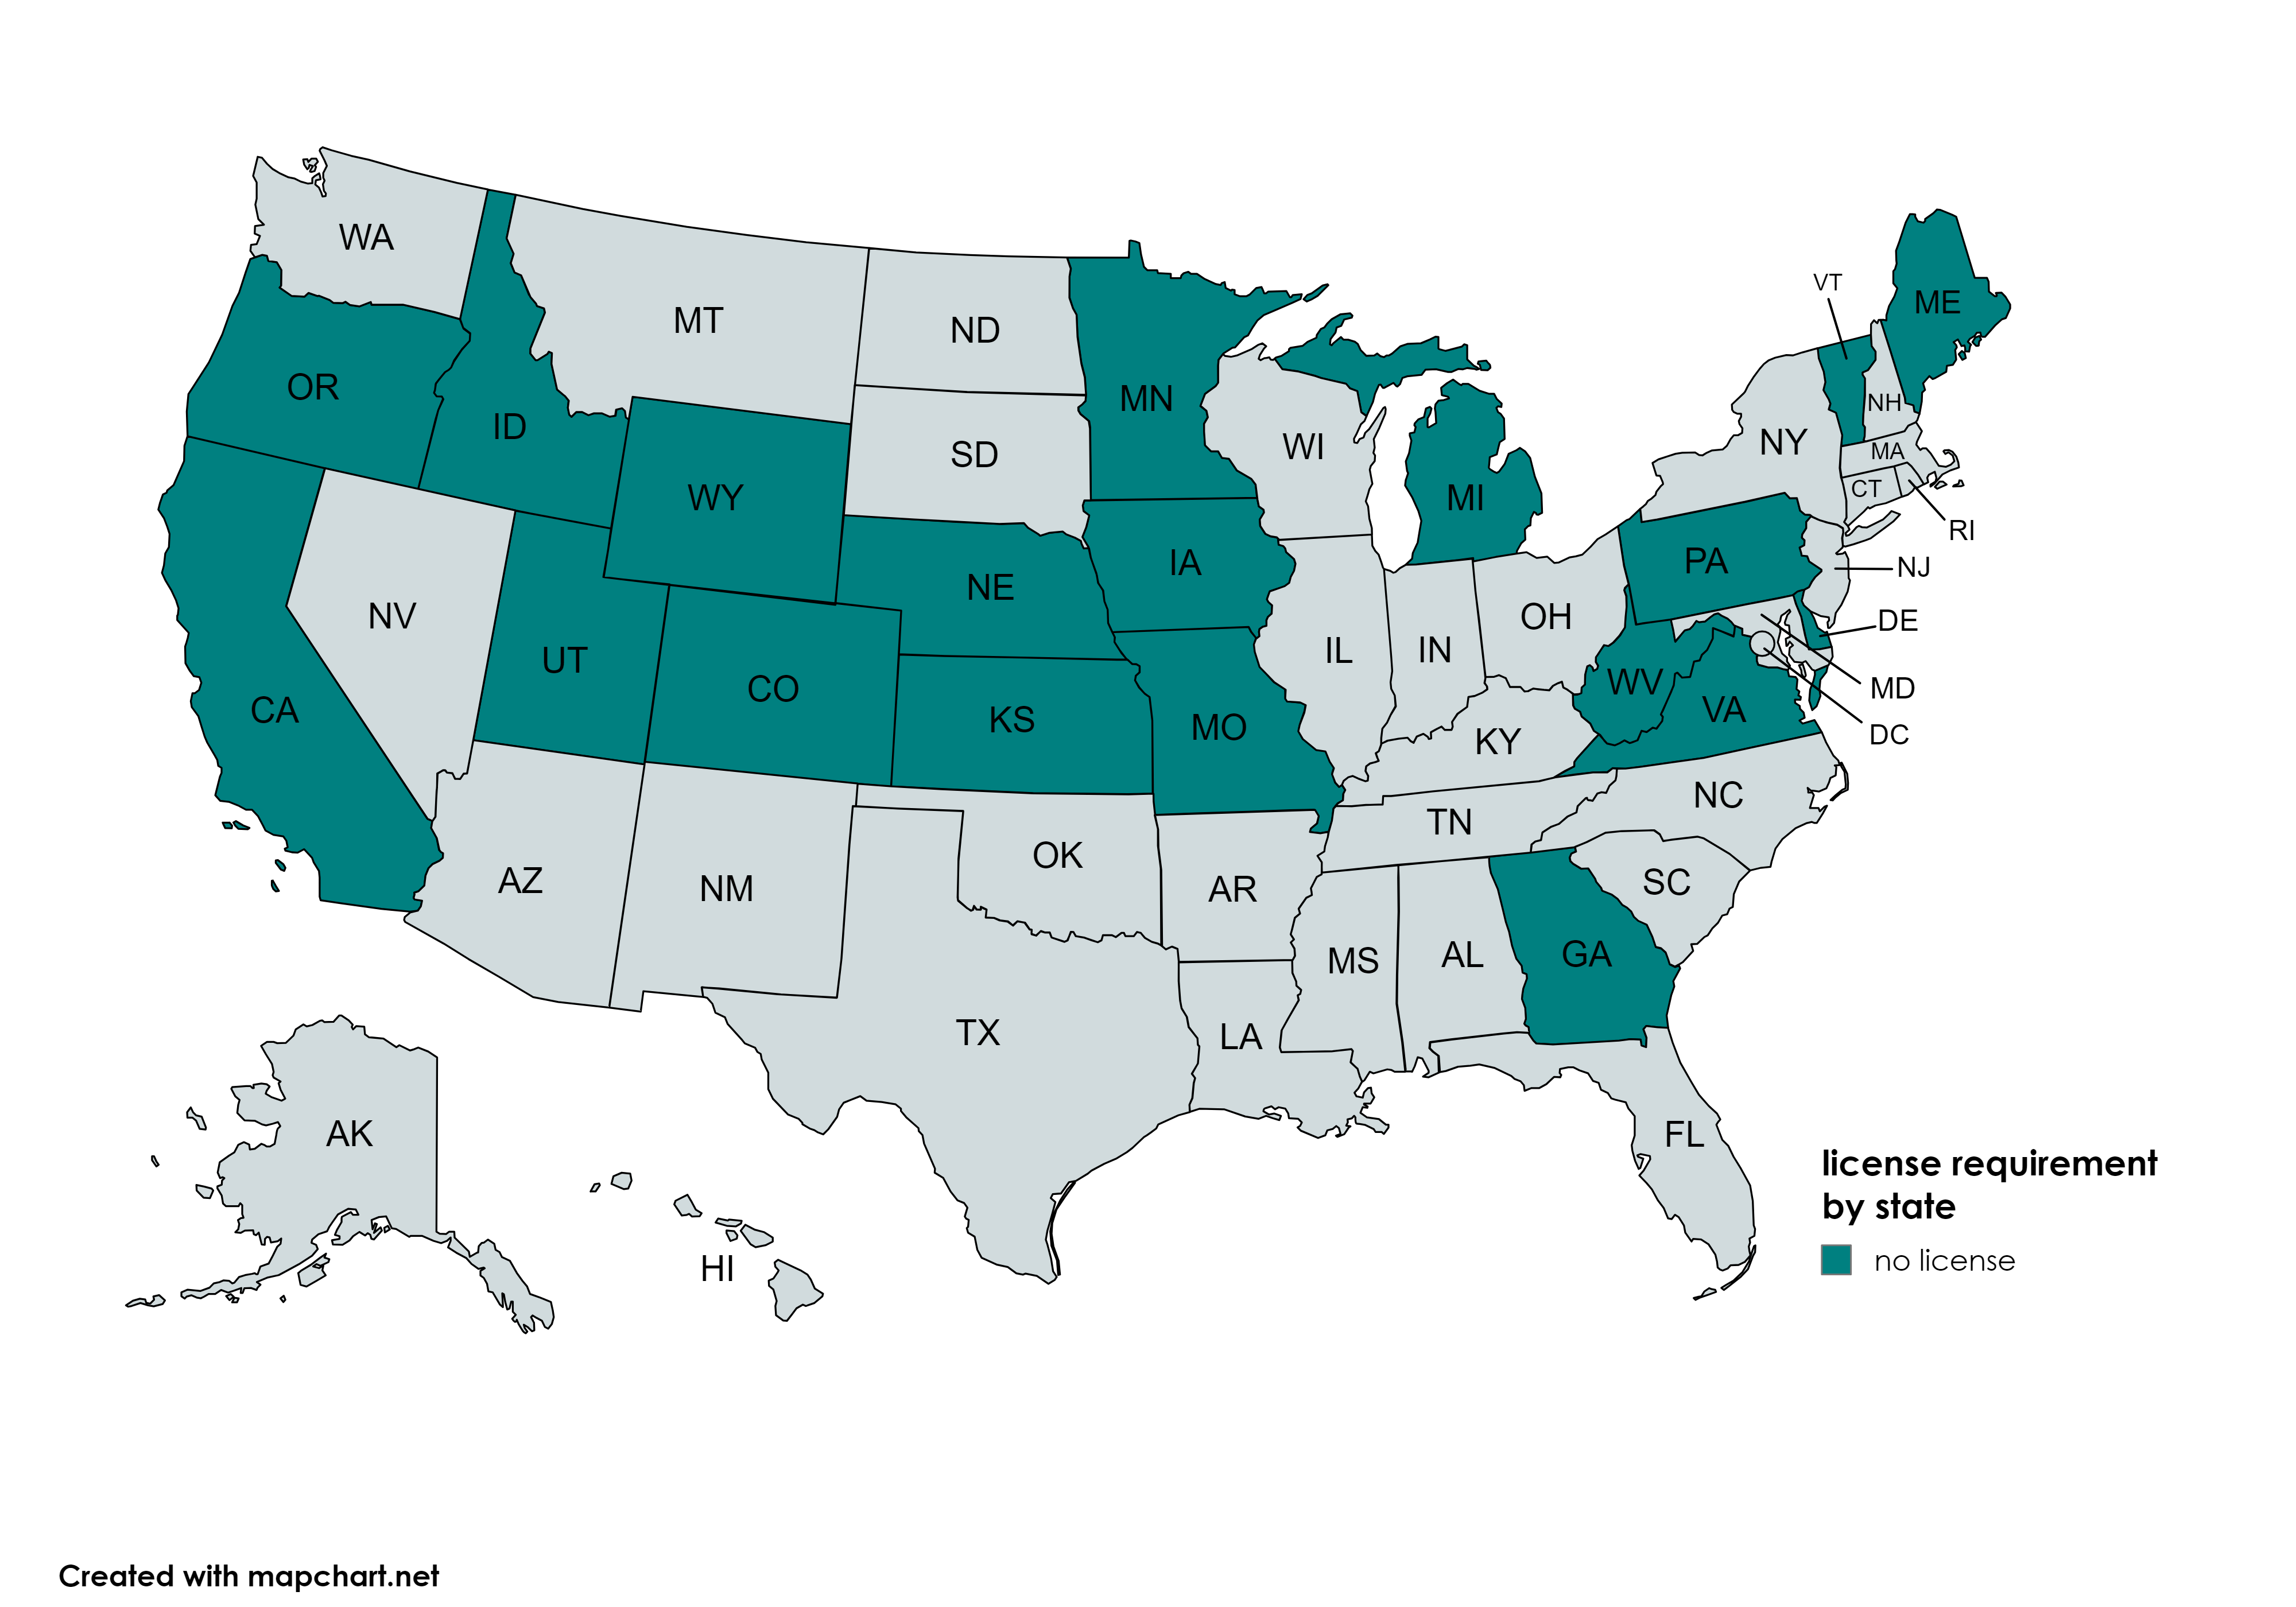 License Requirement by State Map